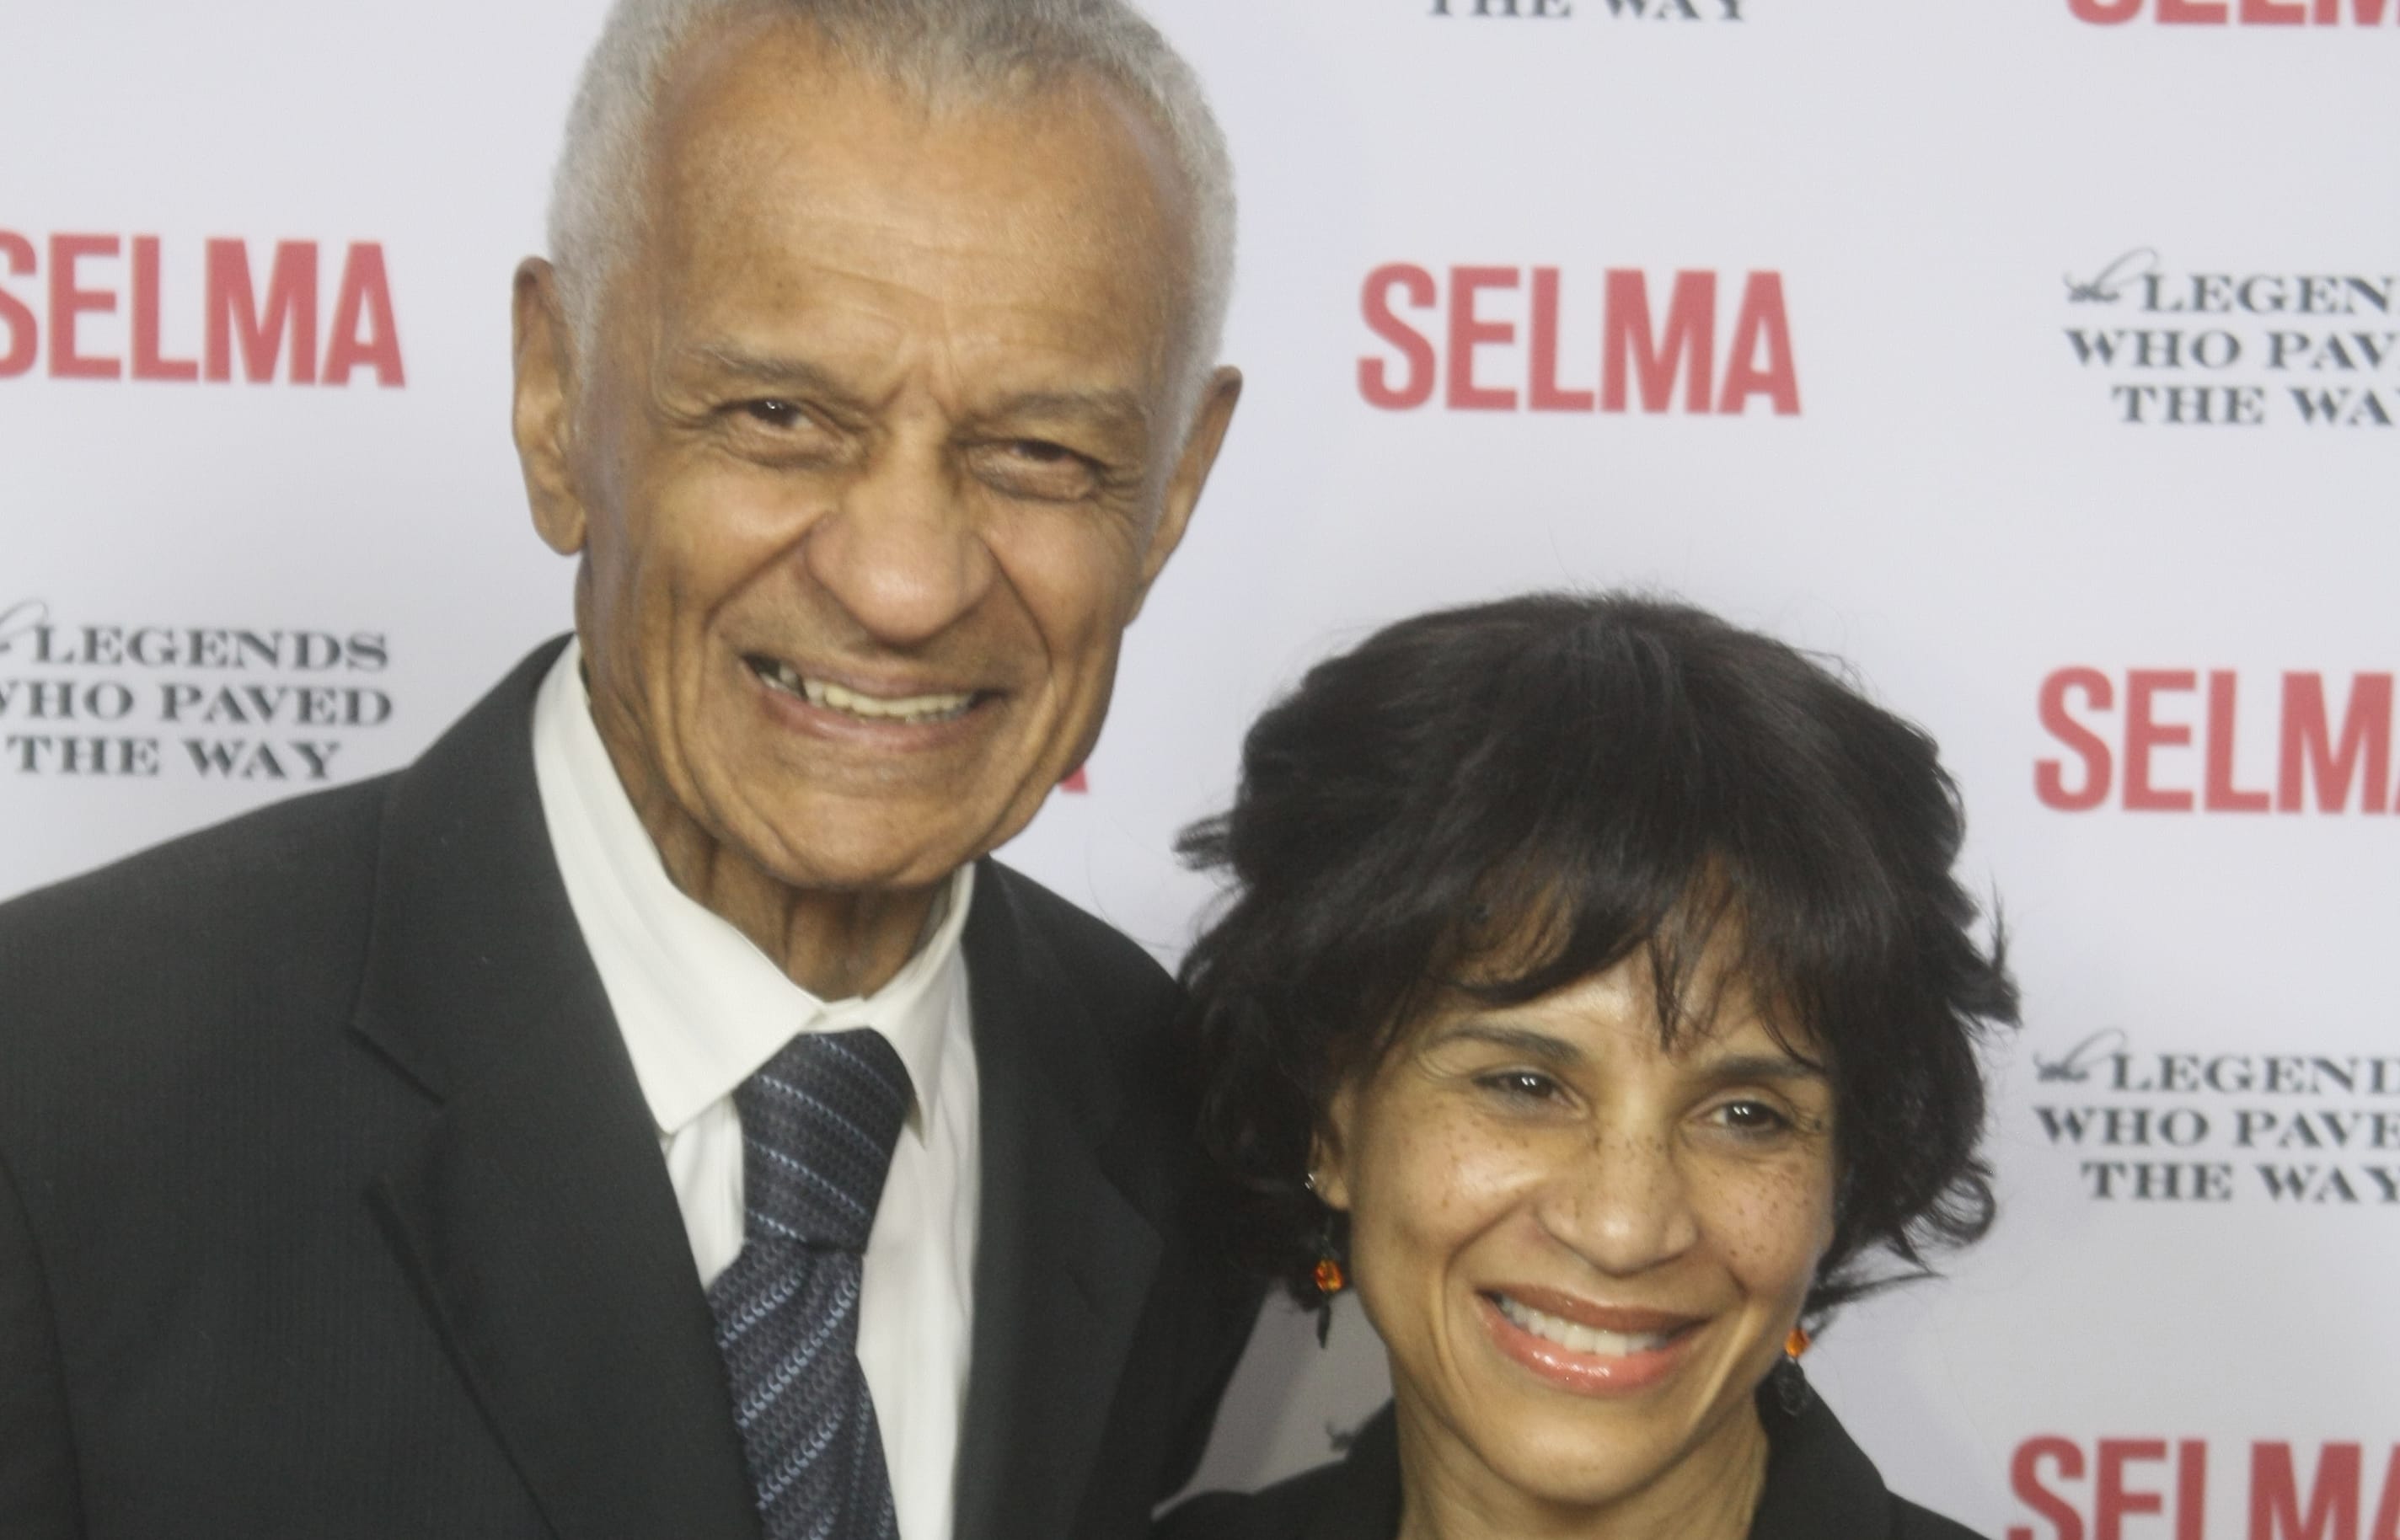 CT Vivian and Octavian Vivian attend a special screening of "Selma," in Goleta, California, December 6, 2014 as part of "The Legends Who Paved The Way" gala event.     AFP PHOTO / Rod Rolle (Photo by Rod Rolle / AFP)